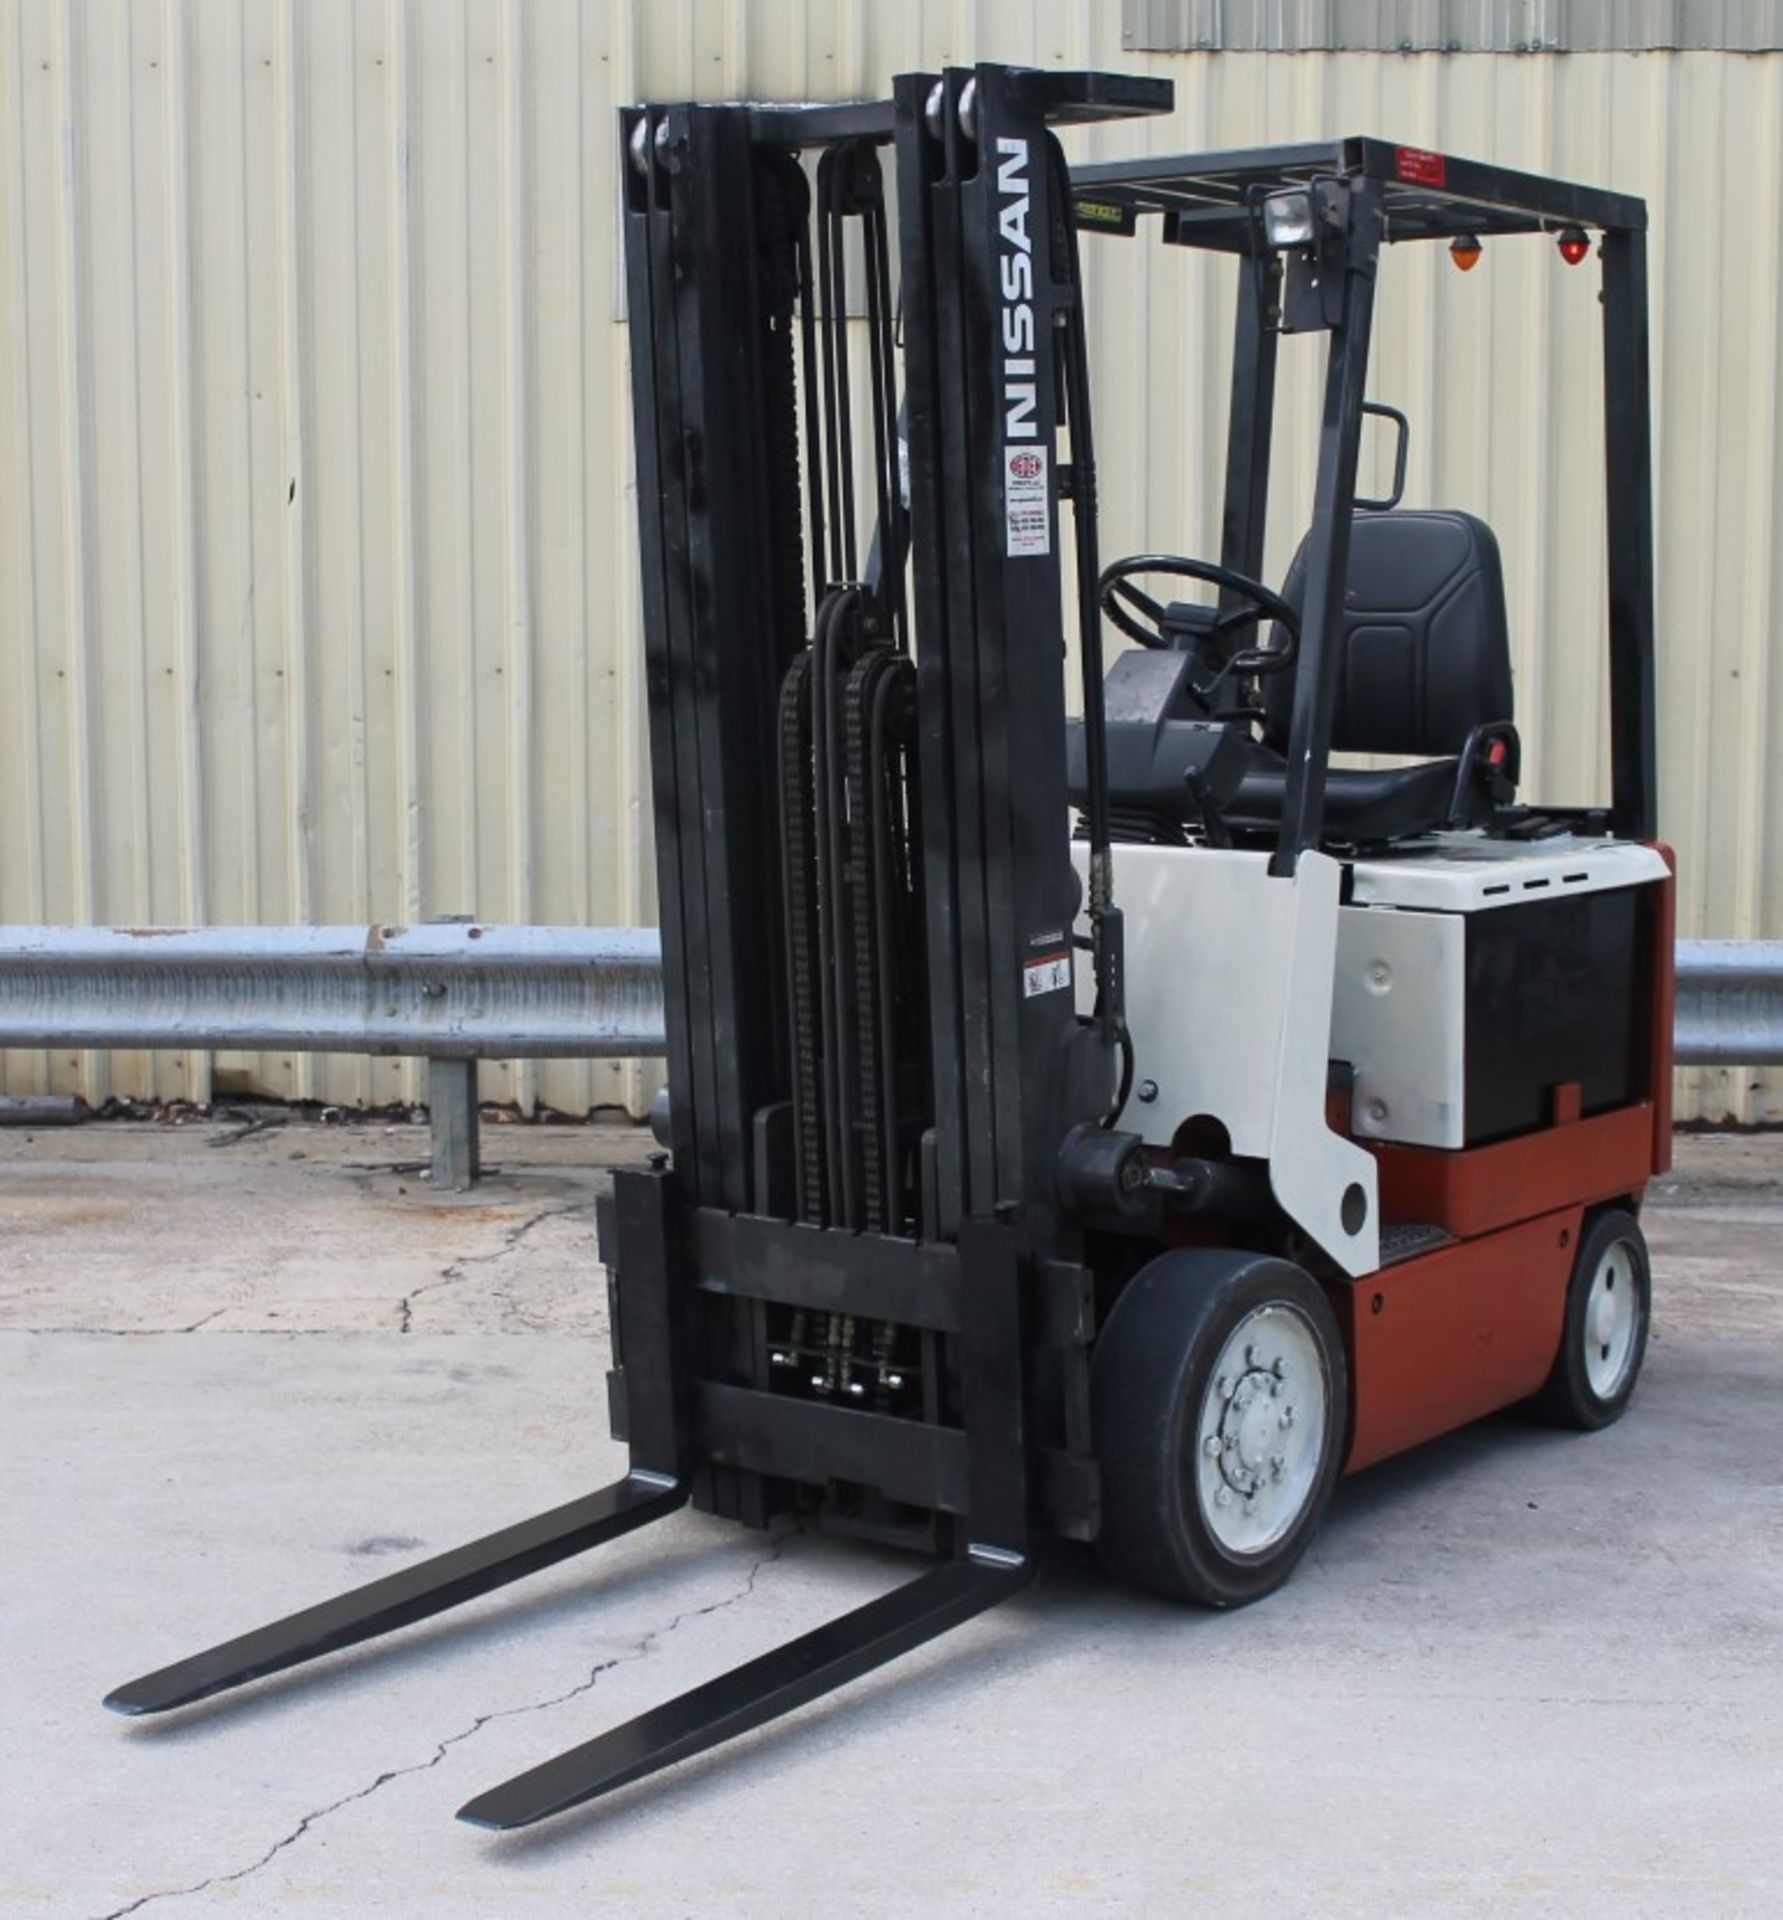 2004 NISSAN 4000 LBS CAPACITY ELECTRIC FORKLIFT WITH 2012 BATTERY, (WATCH VIDEO) - Image 4 of 5